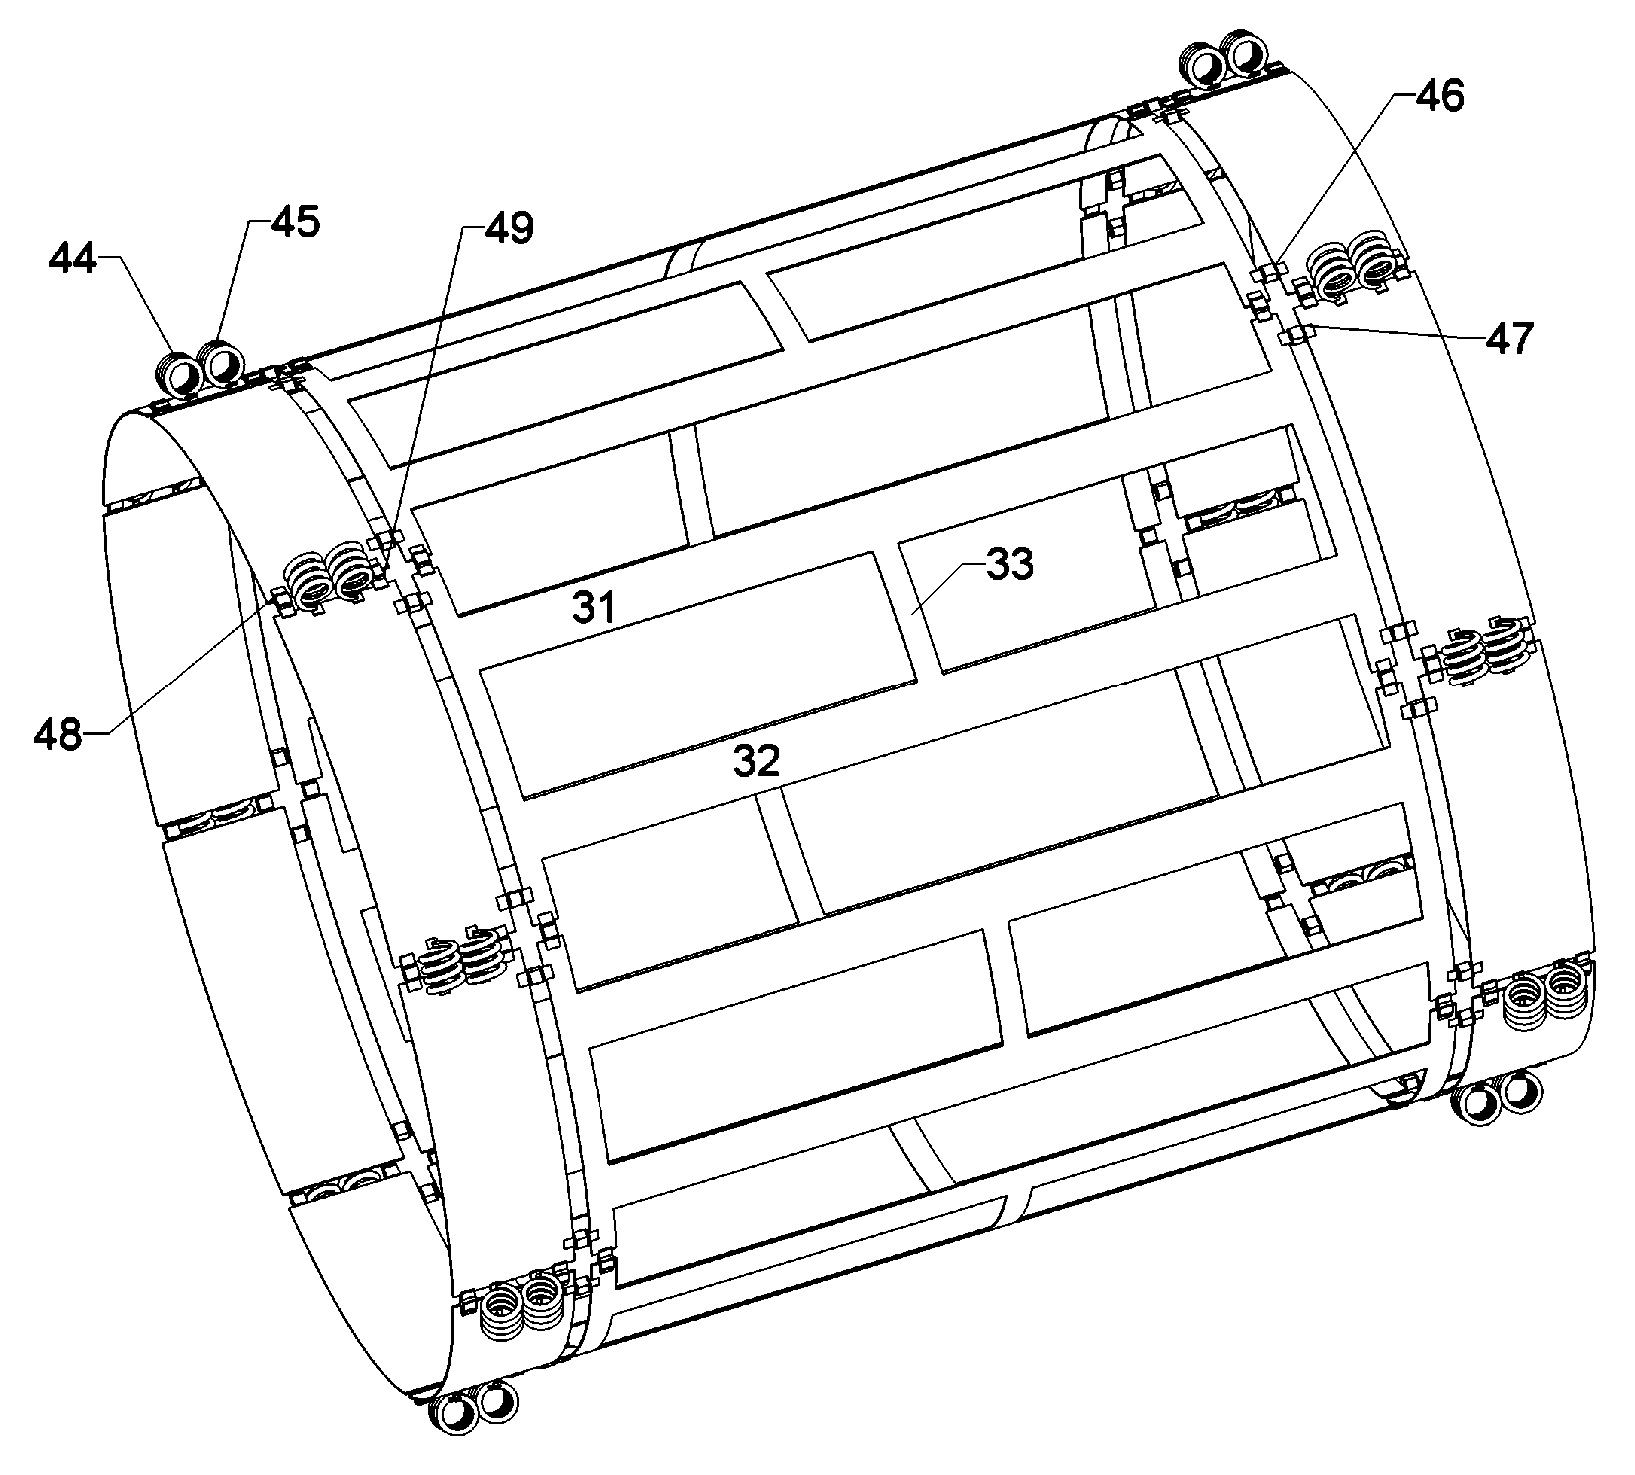 Double-balanced double-tuned CP birdcage with similar field profiles